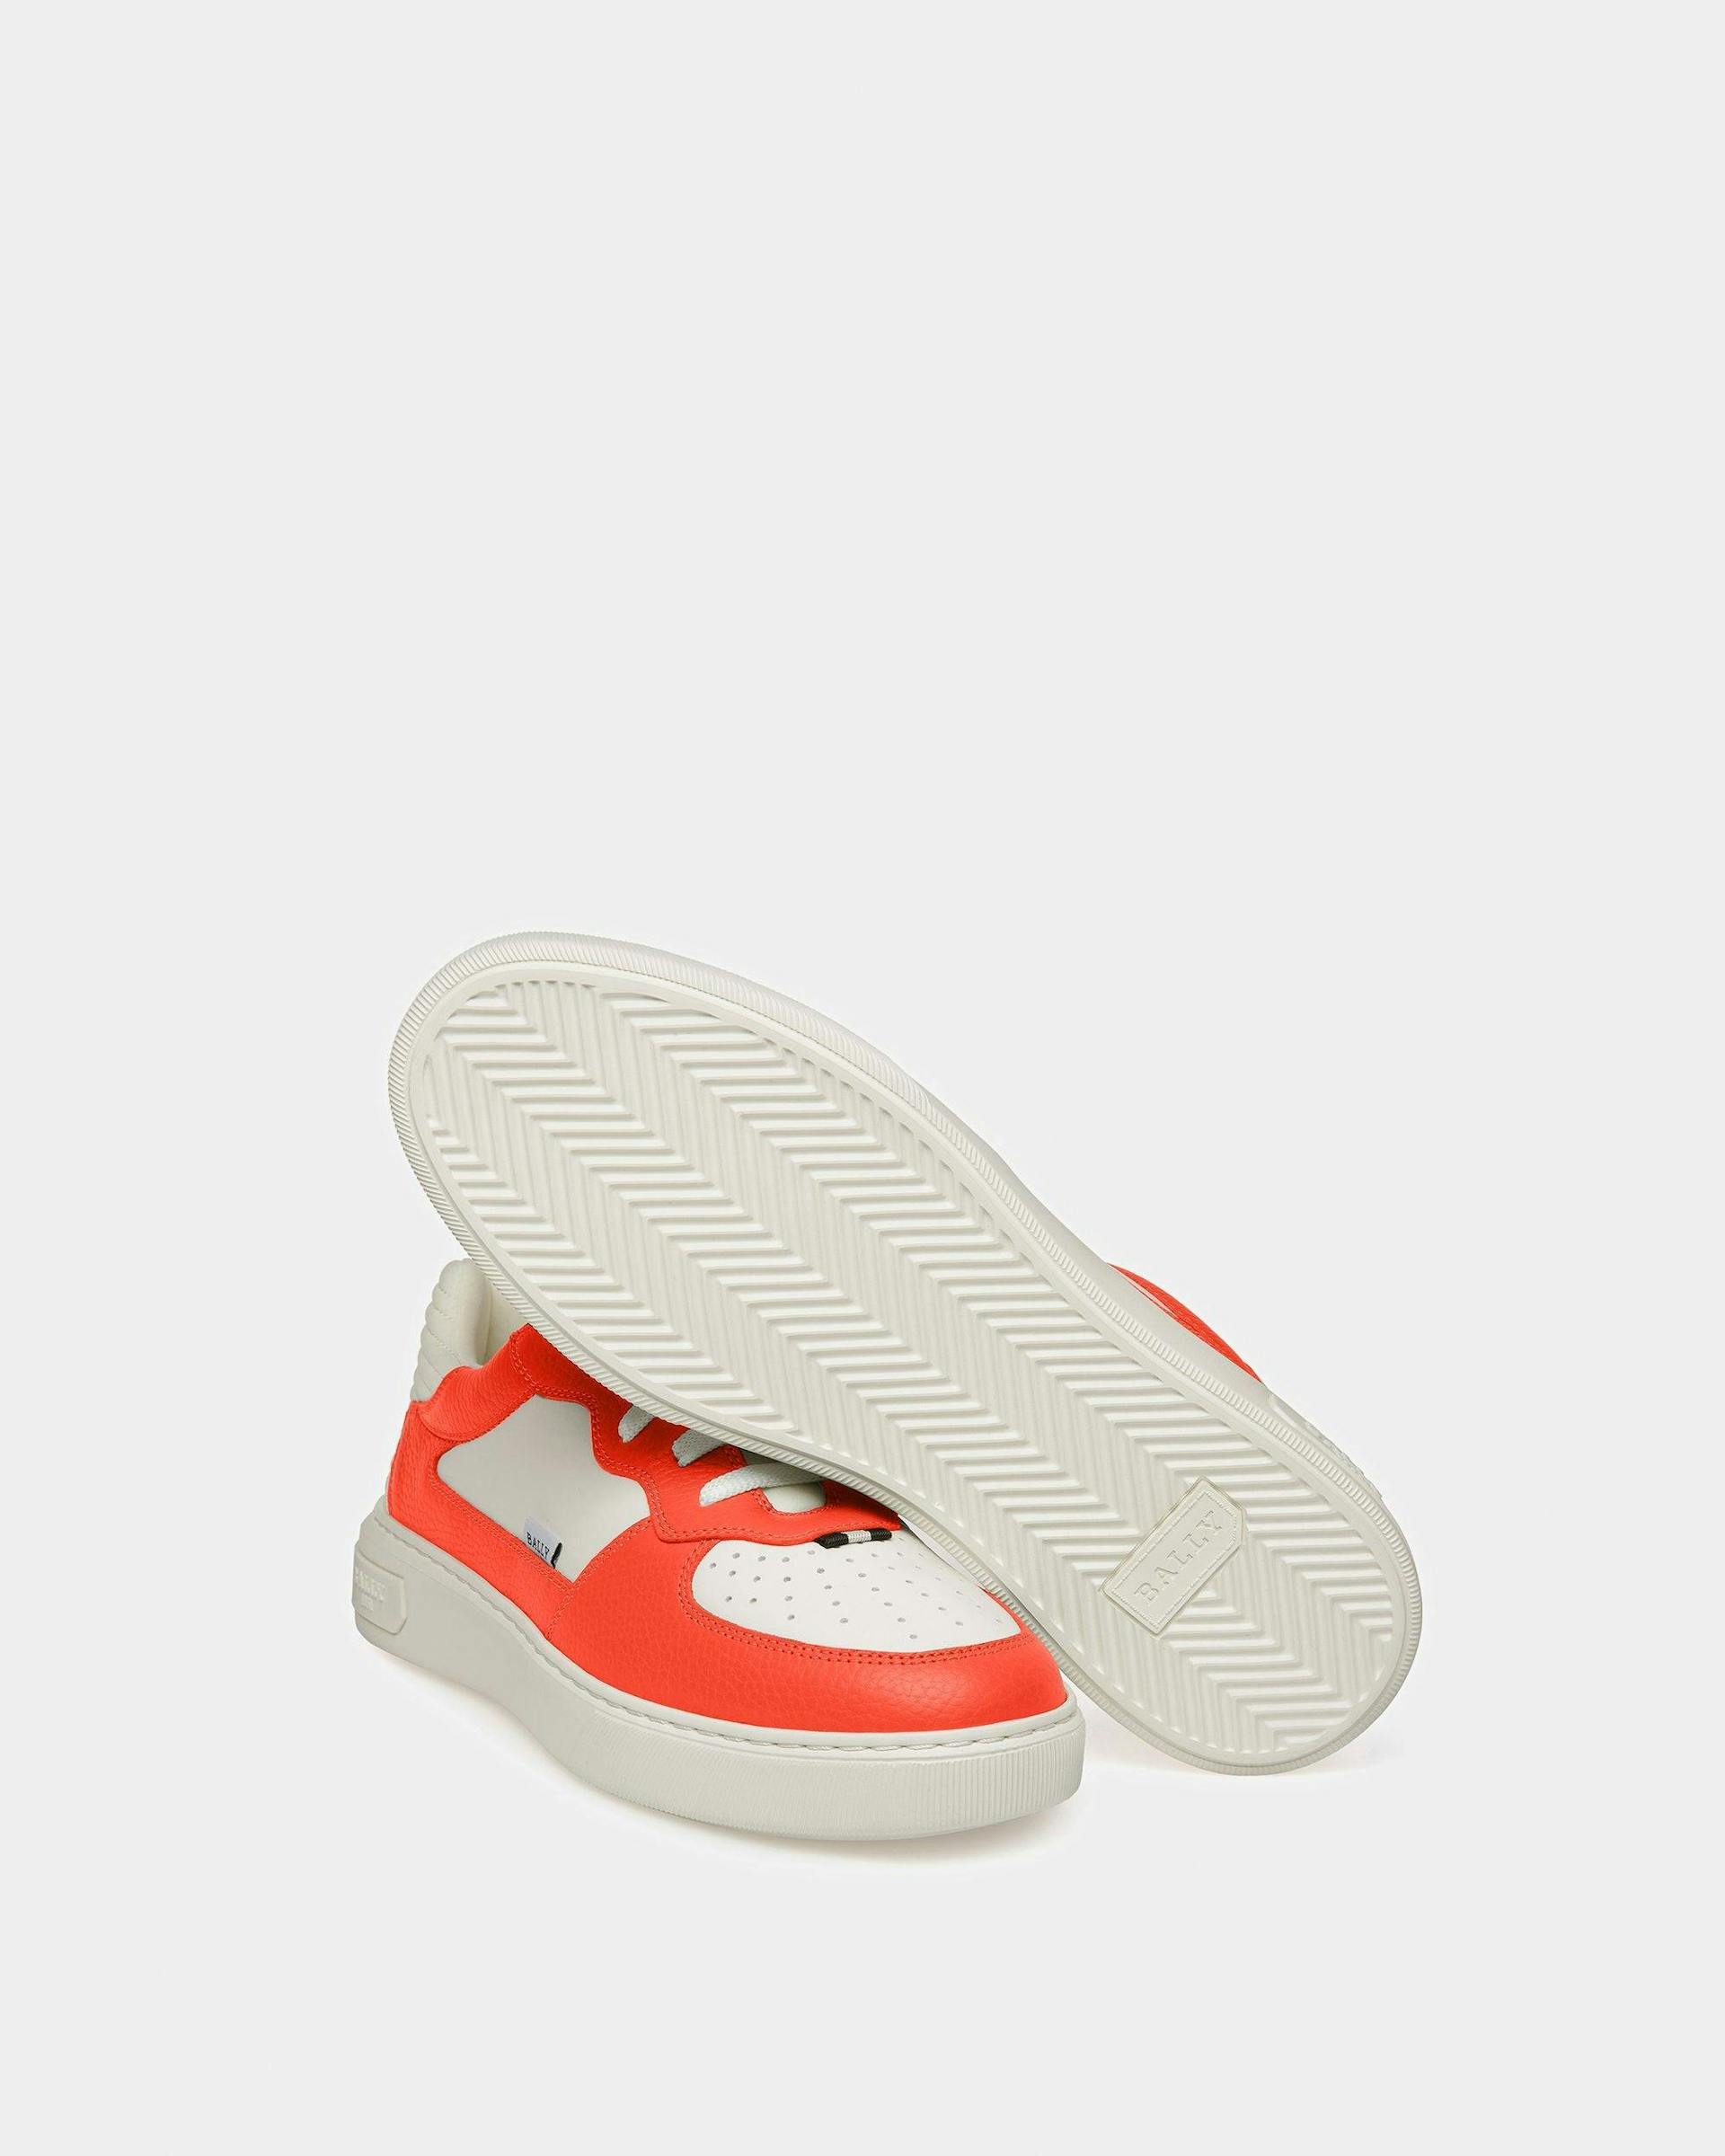 Mark Leather Sneakers In Orange And White - Men's - Bally - 05